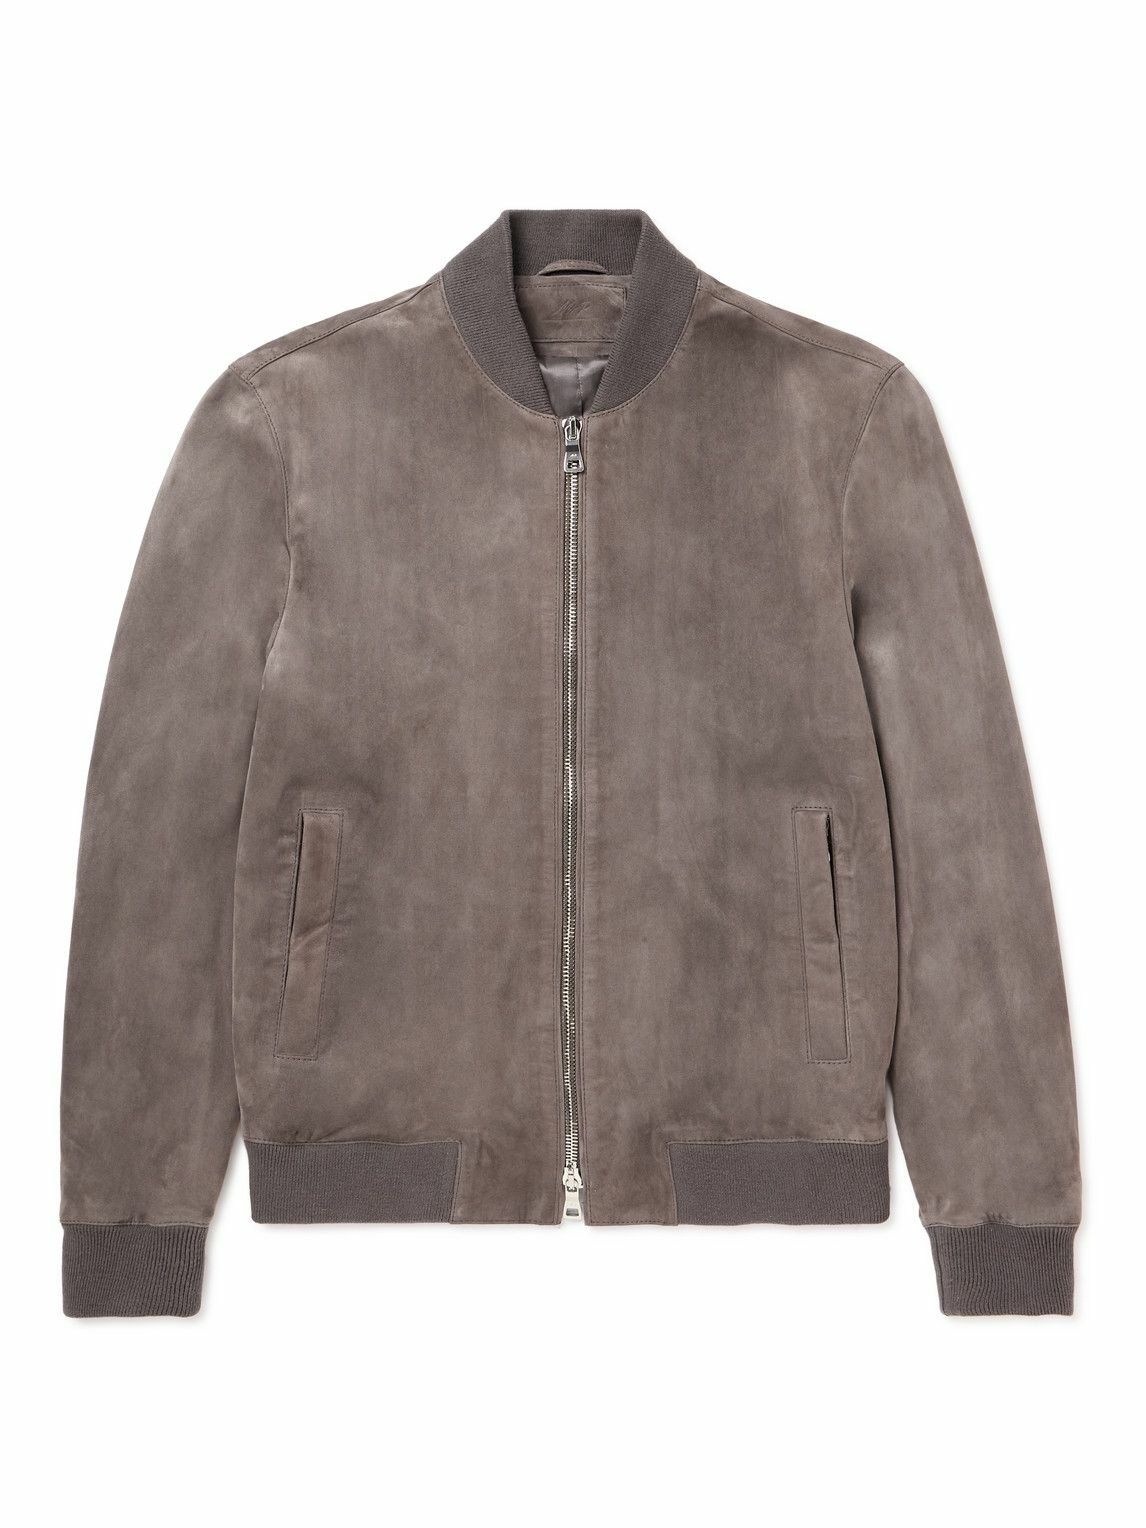 Photo: Mr P. - Suede Bomber Jacket - Unknown